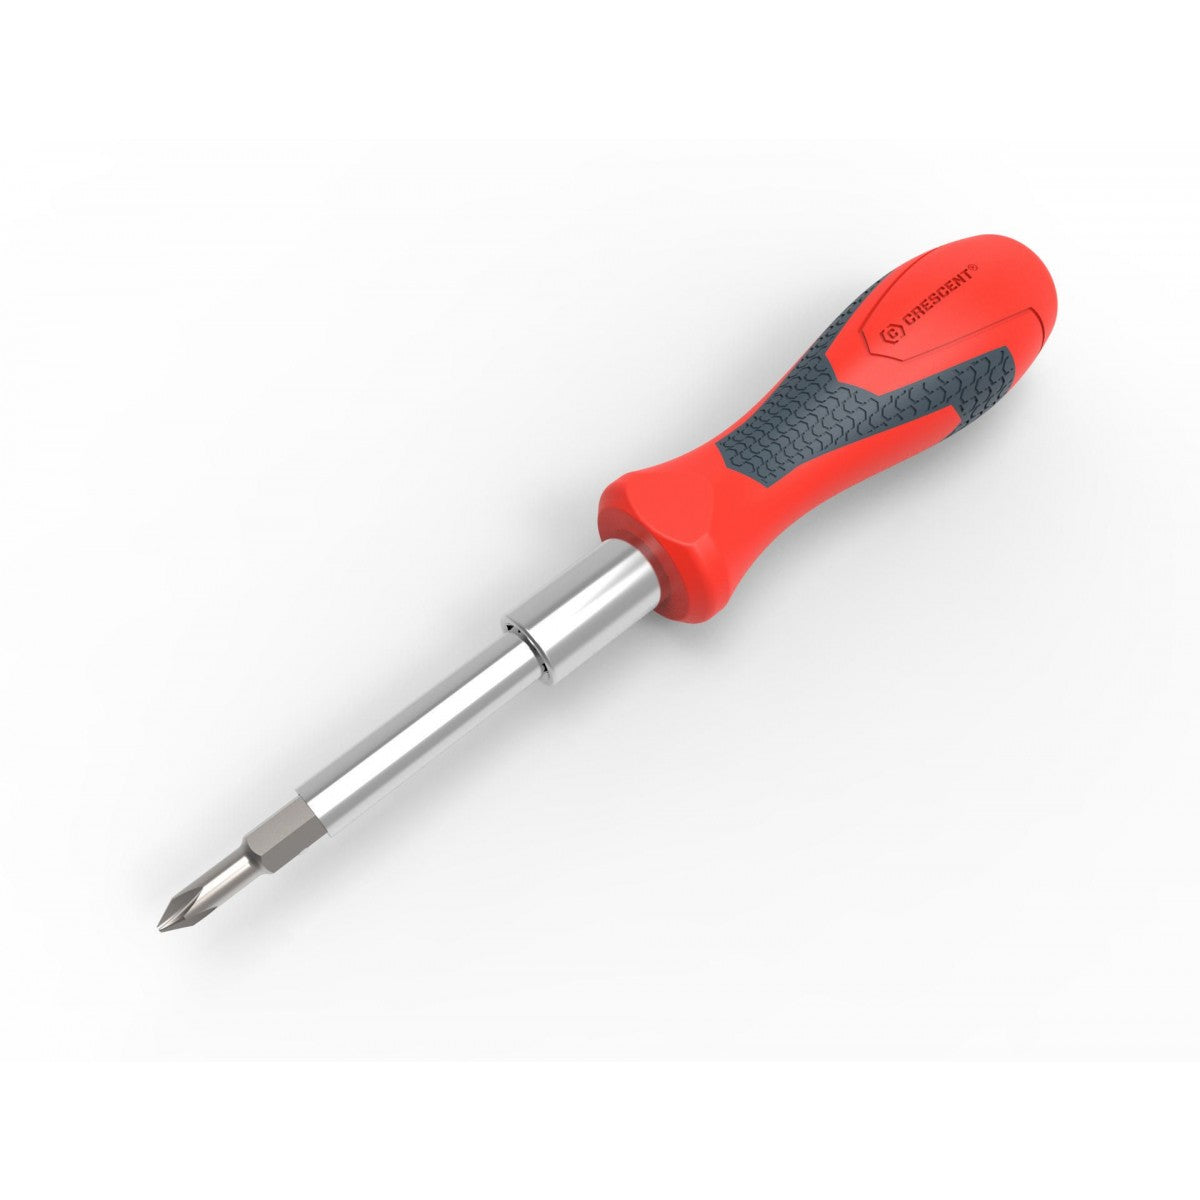 Buy crescent cmbd1 - Online store for machinist tools, multi-bit in USA, on sale, low price, discount deals, coupon code